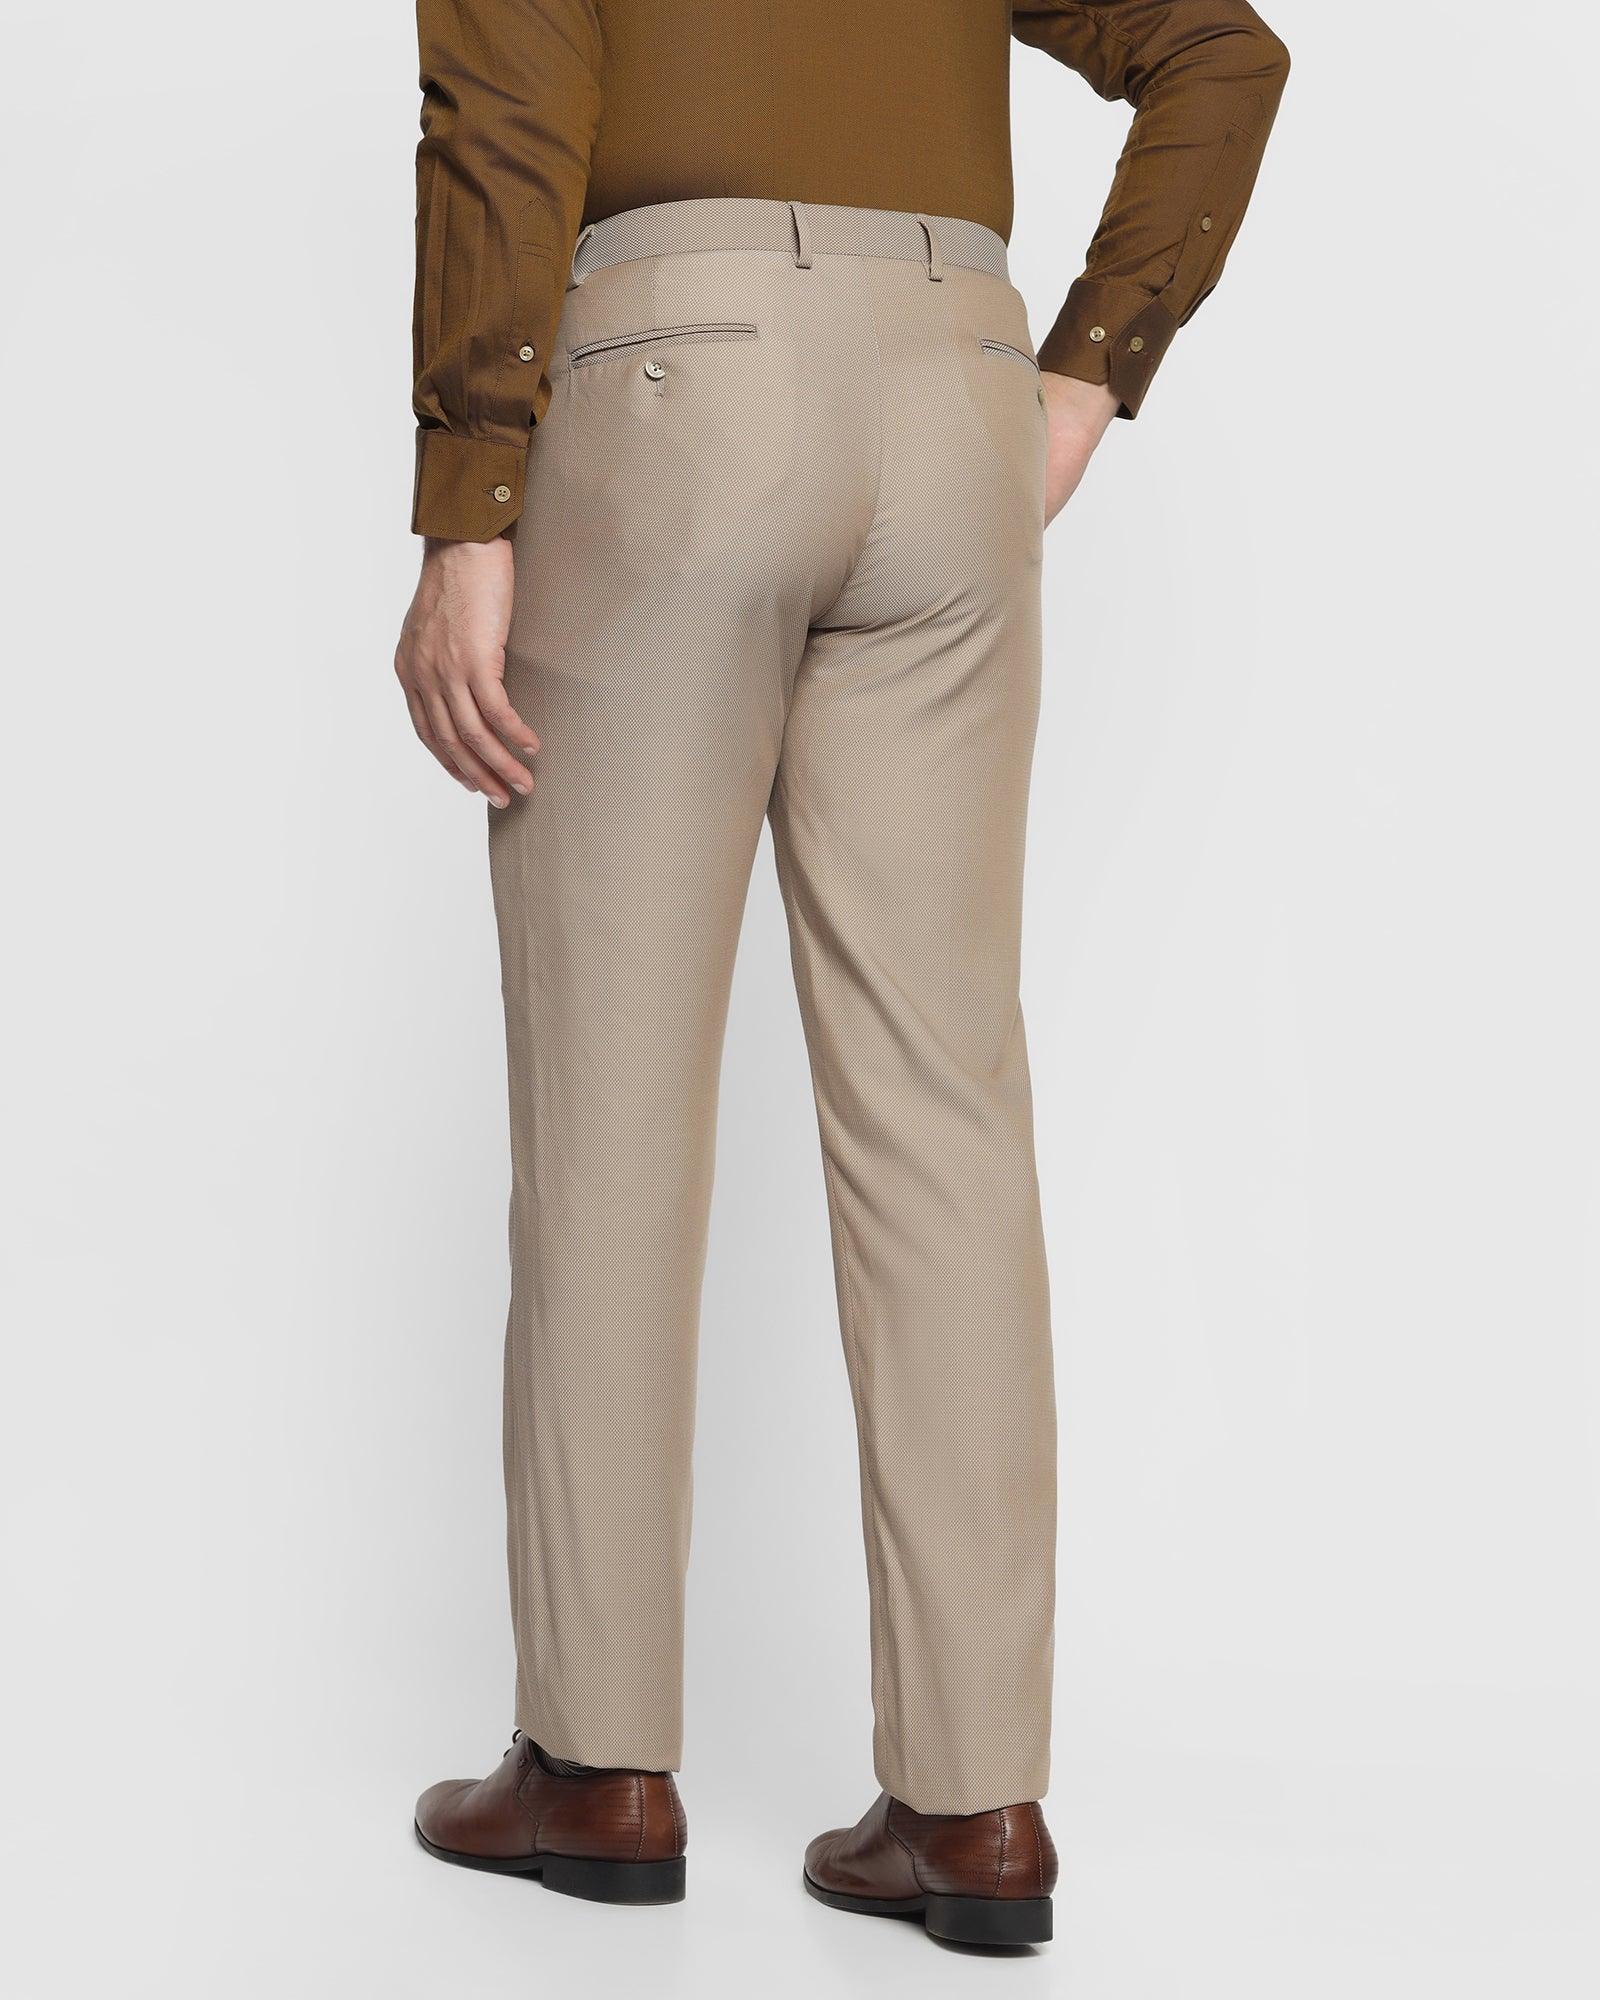 Textured Formal Trousers In Beige B 90 Mandis DLPM2193A2IA22FD image2